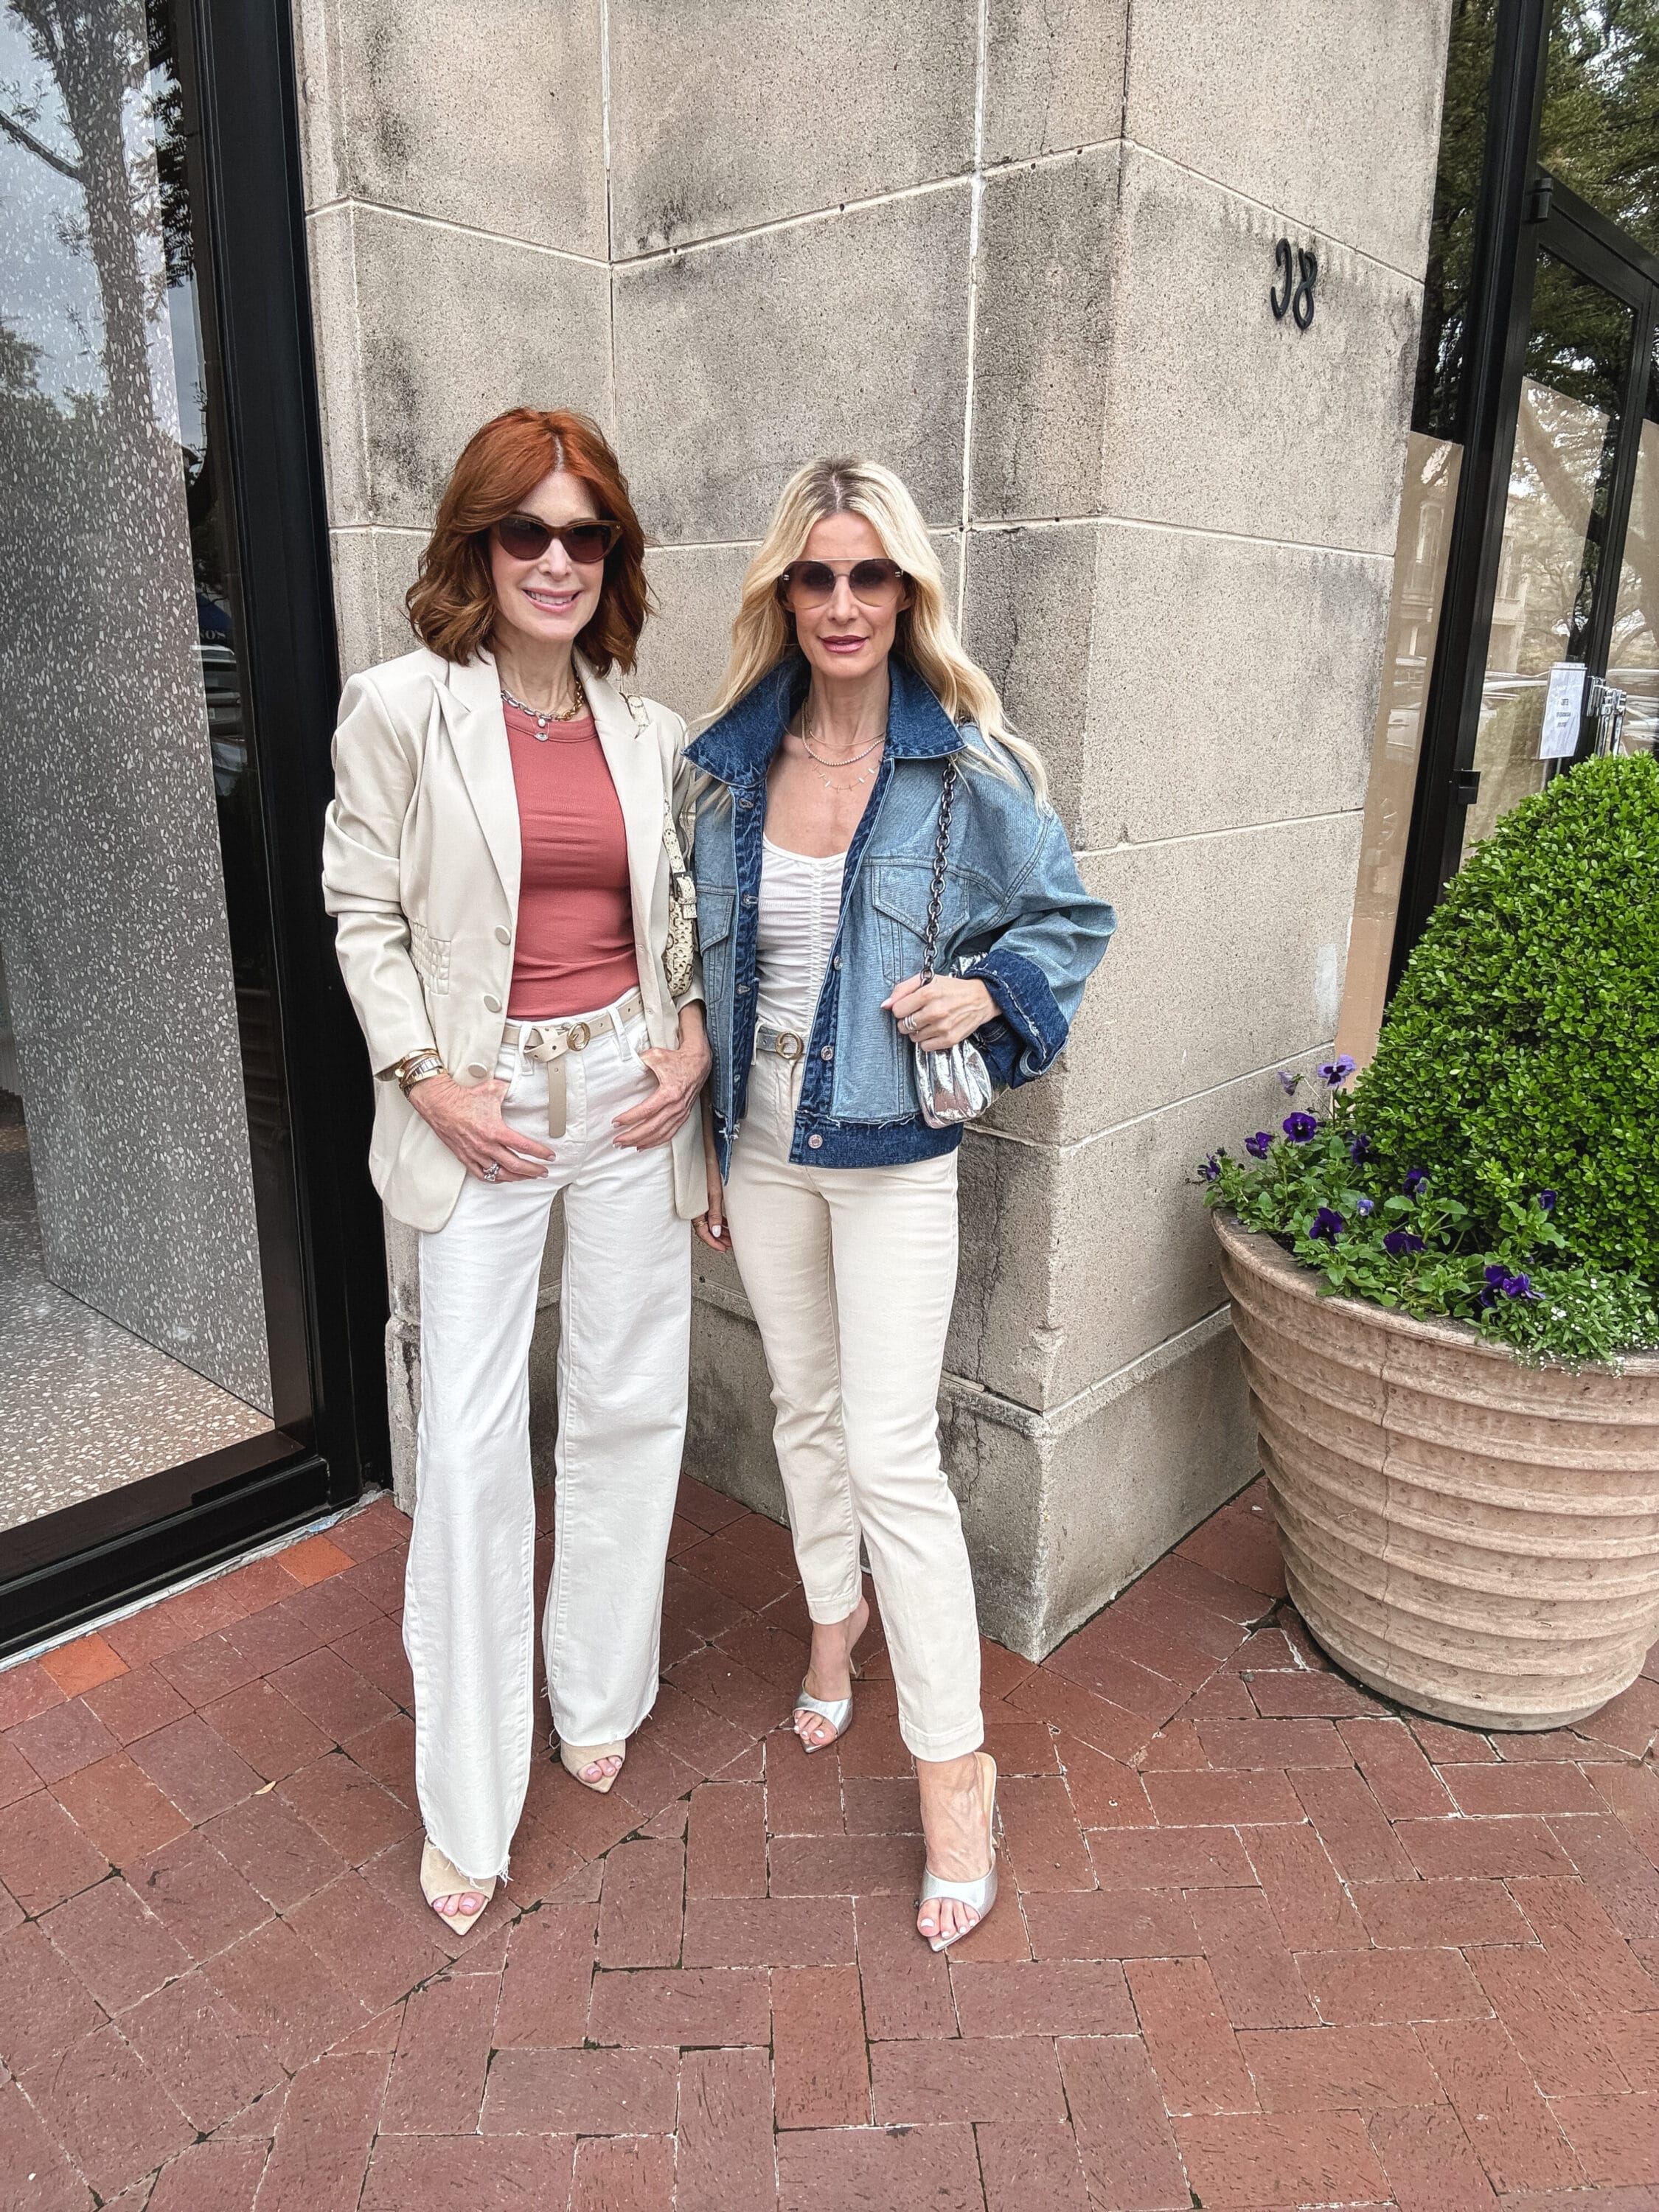 Over 40 fashion influencer wearing ivory denim with a two toned denim jacket and silver accessories.